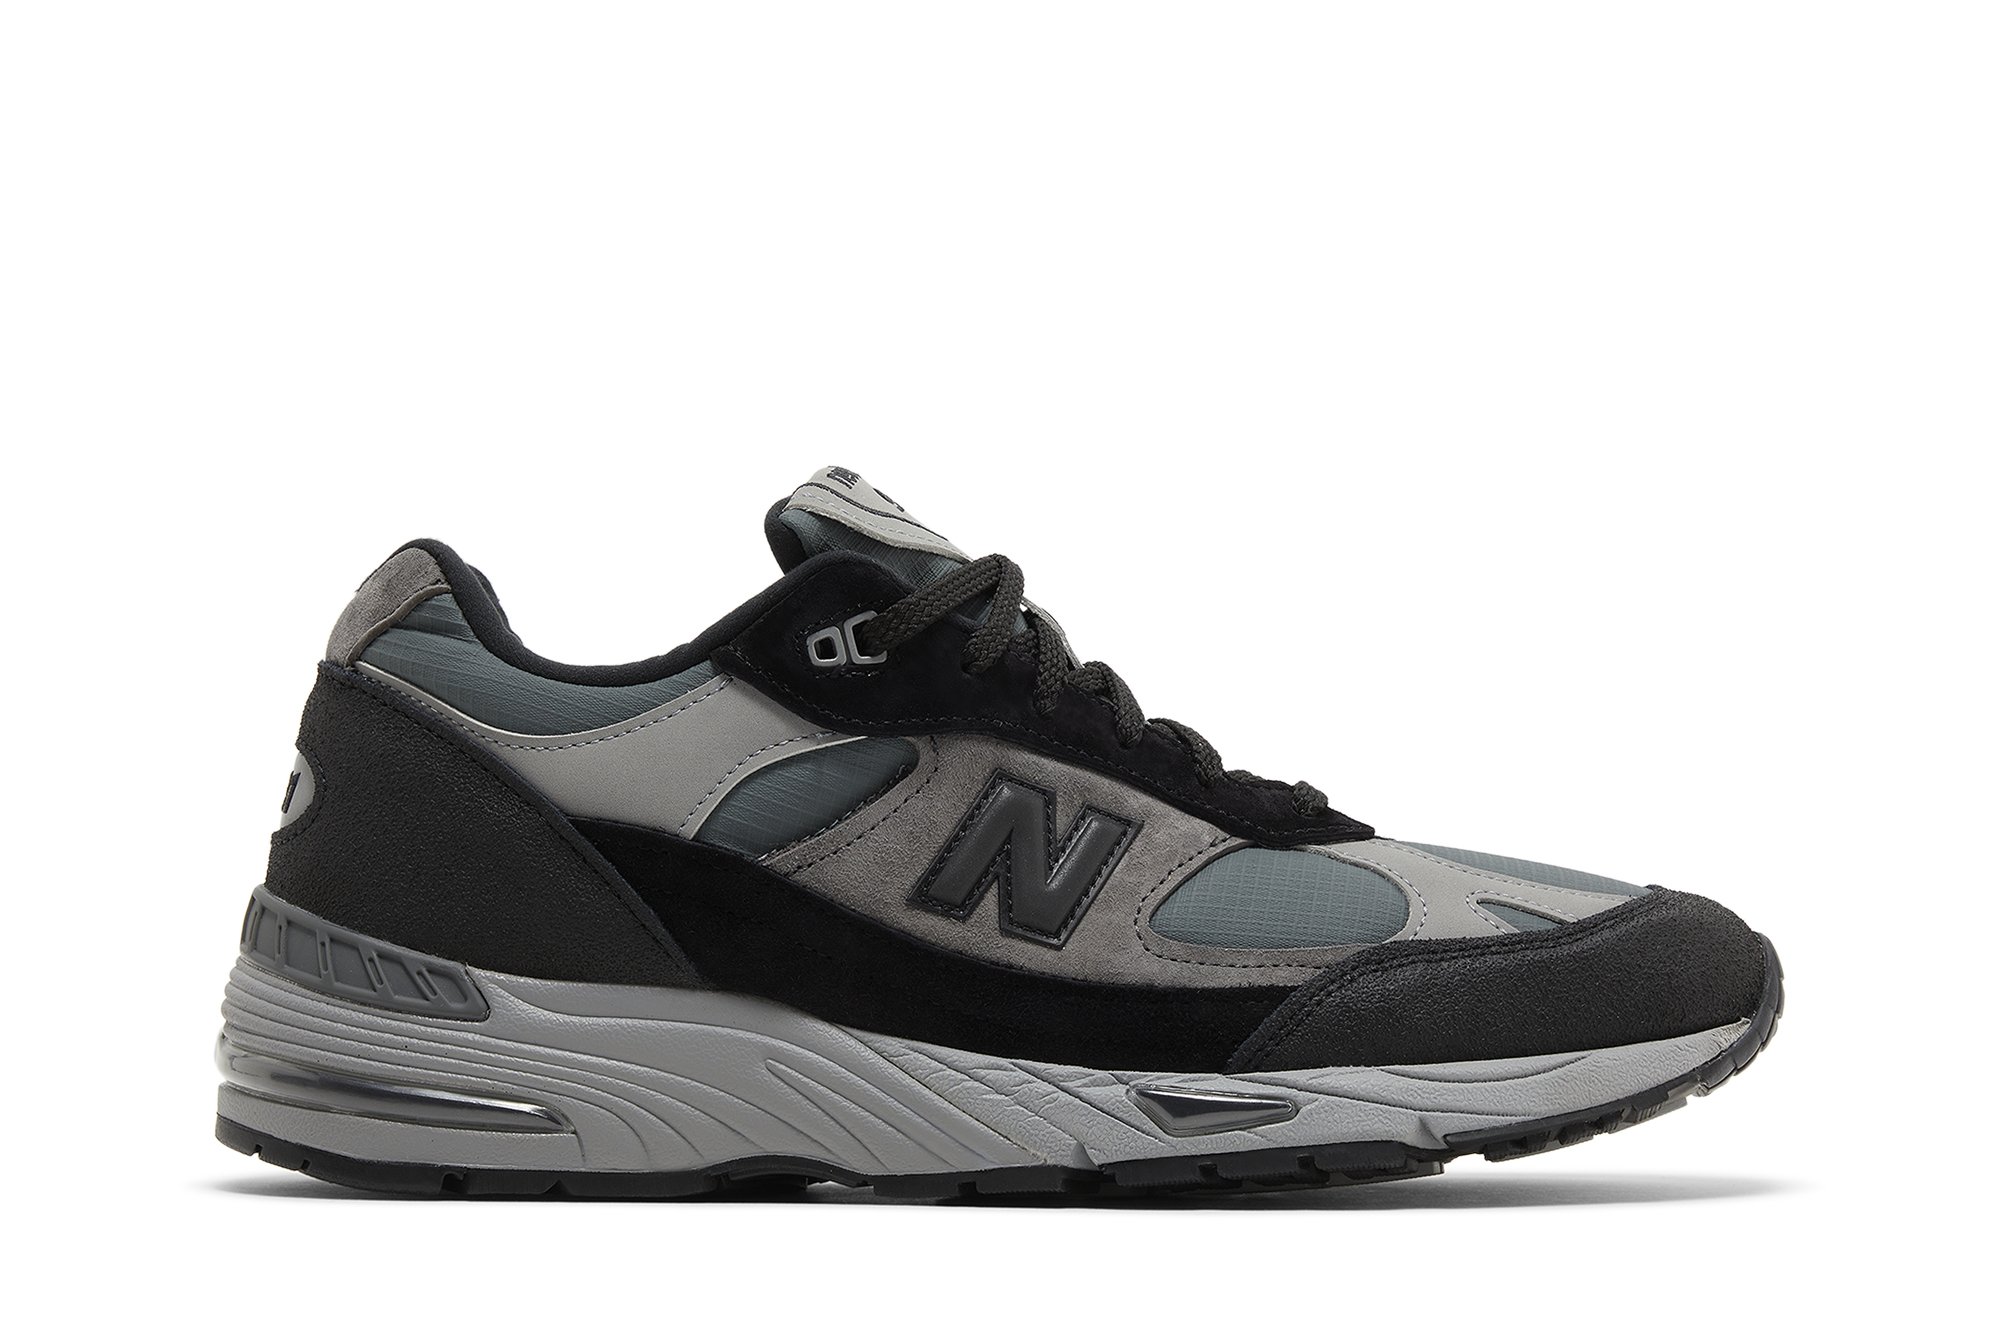 New Balance Made in UK 991v1 Urban Sneakers